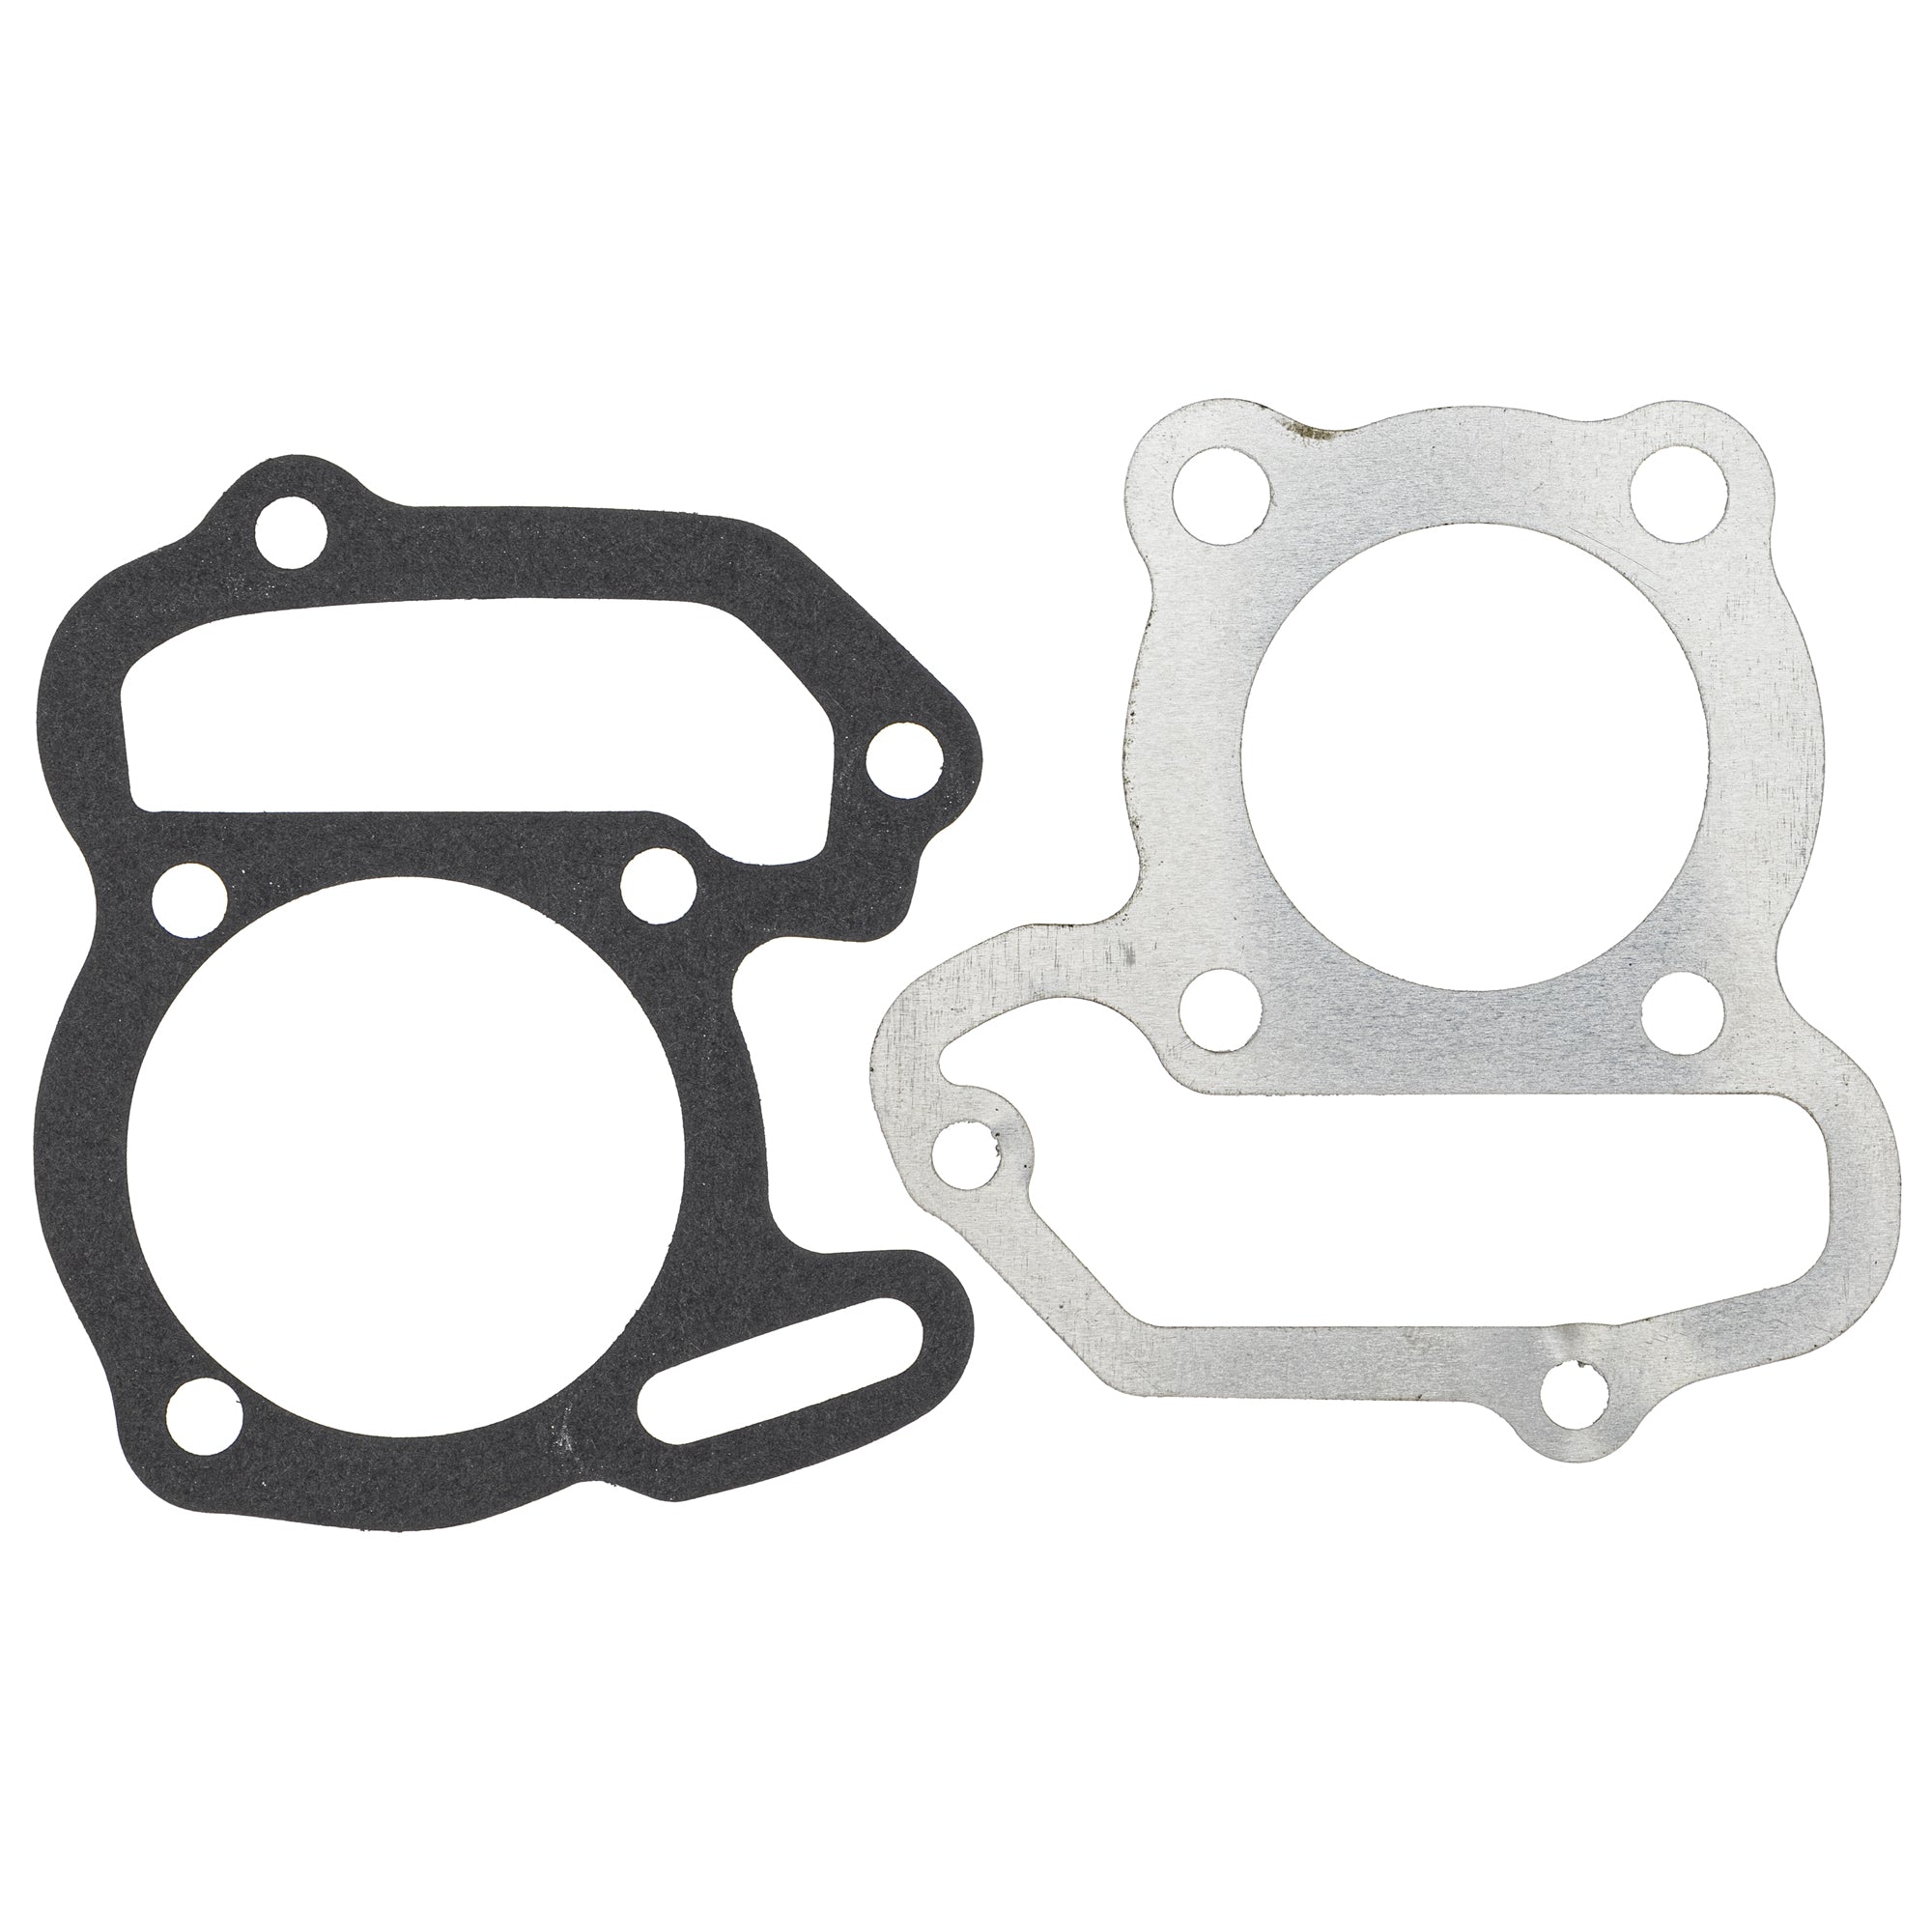 Standard Bore Top End Repair Kit for Yamaha Grizzly Badger Raptor 80